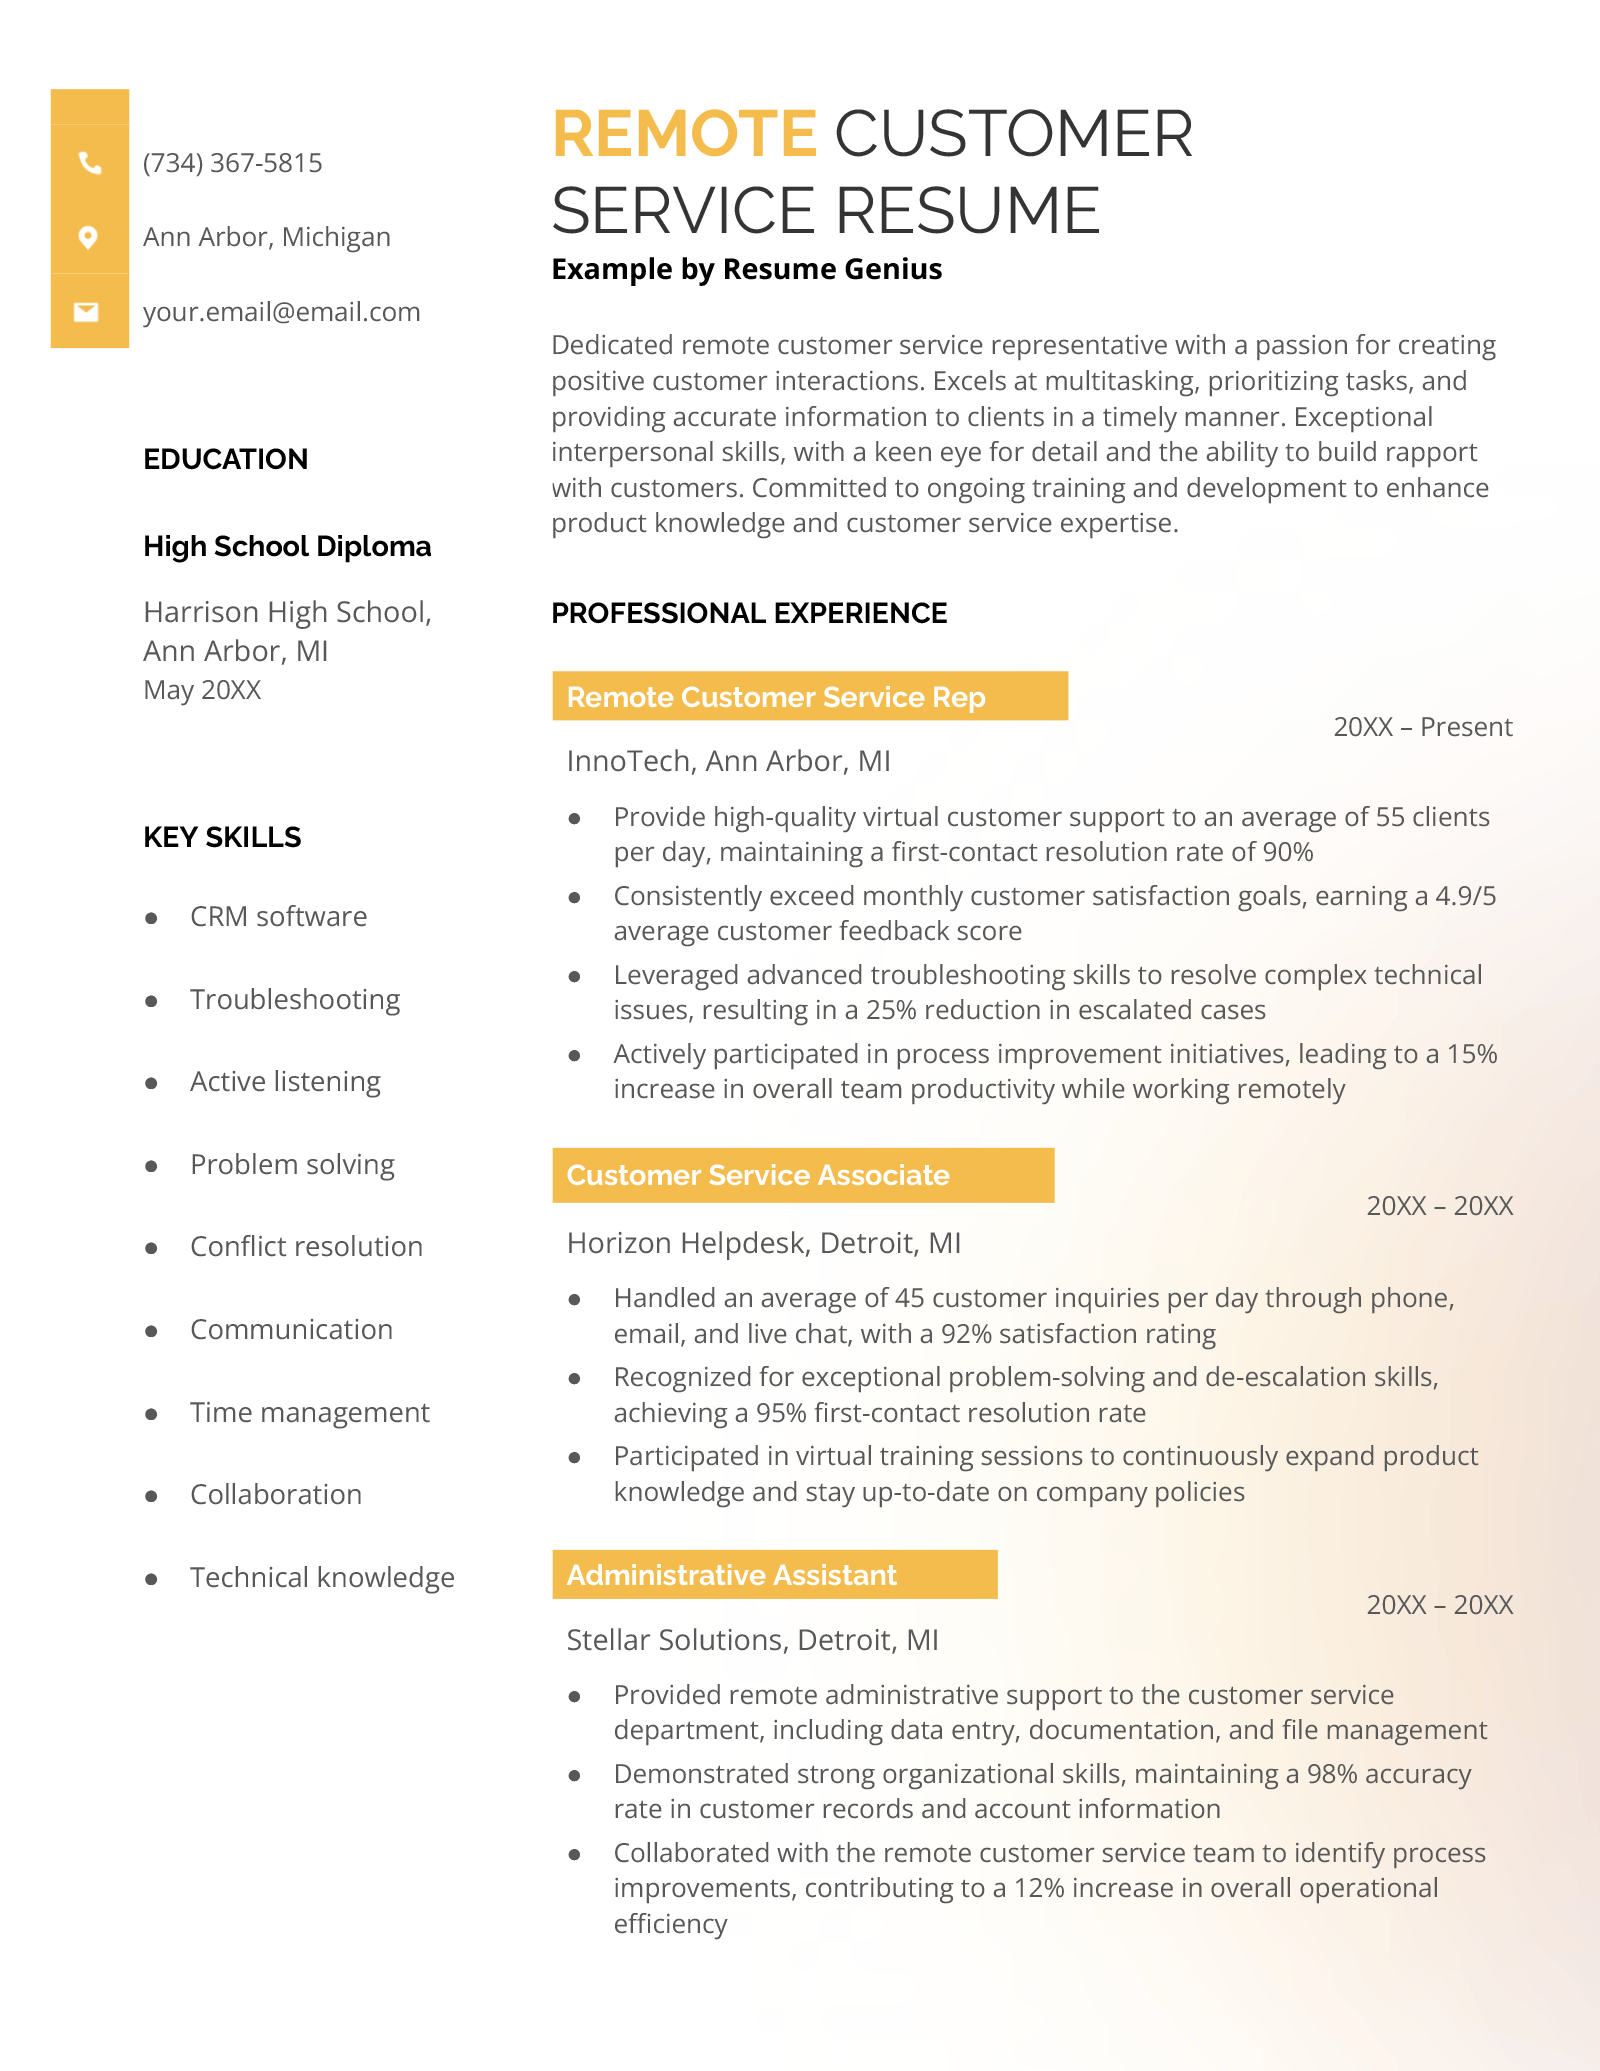 An example resume for a remote customer service professional. 